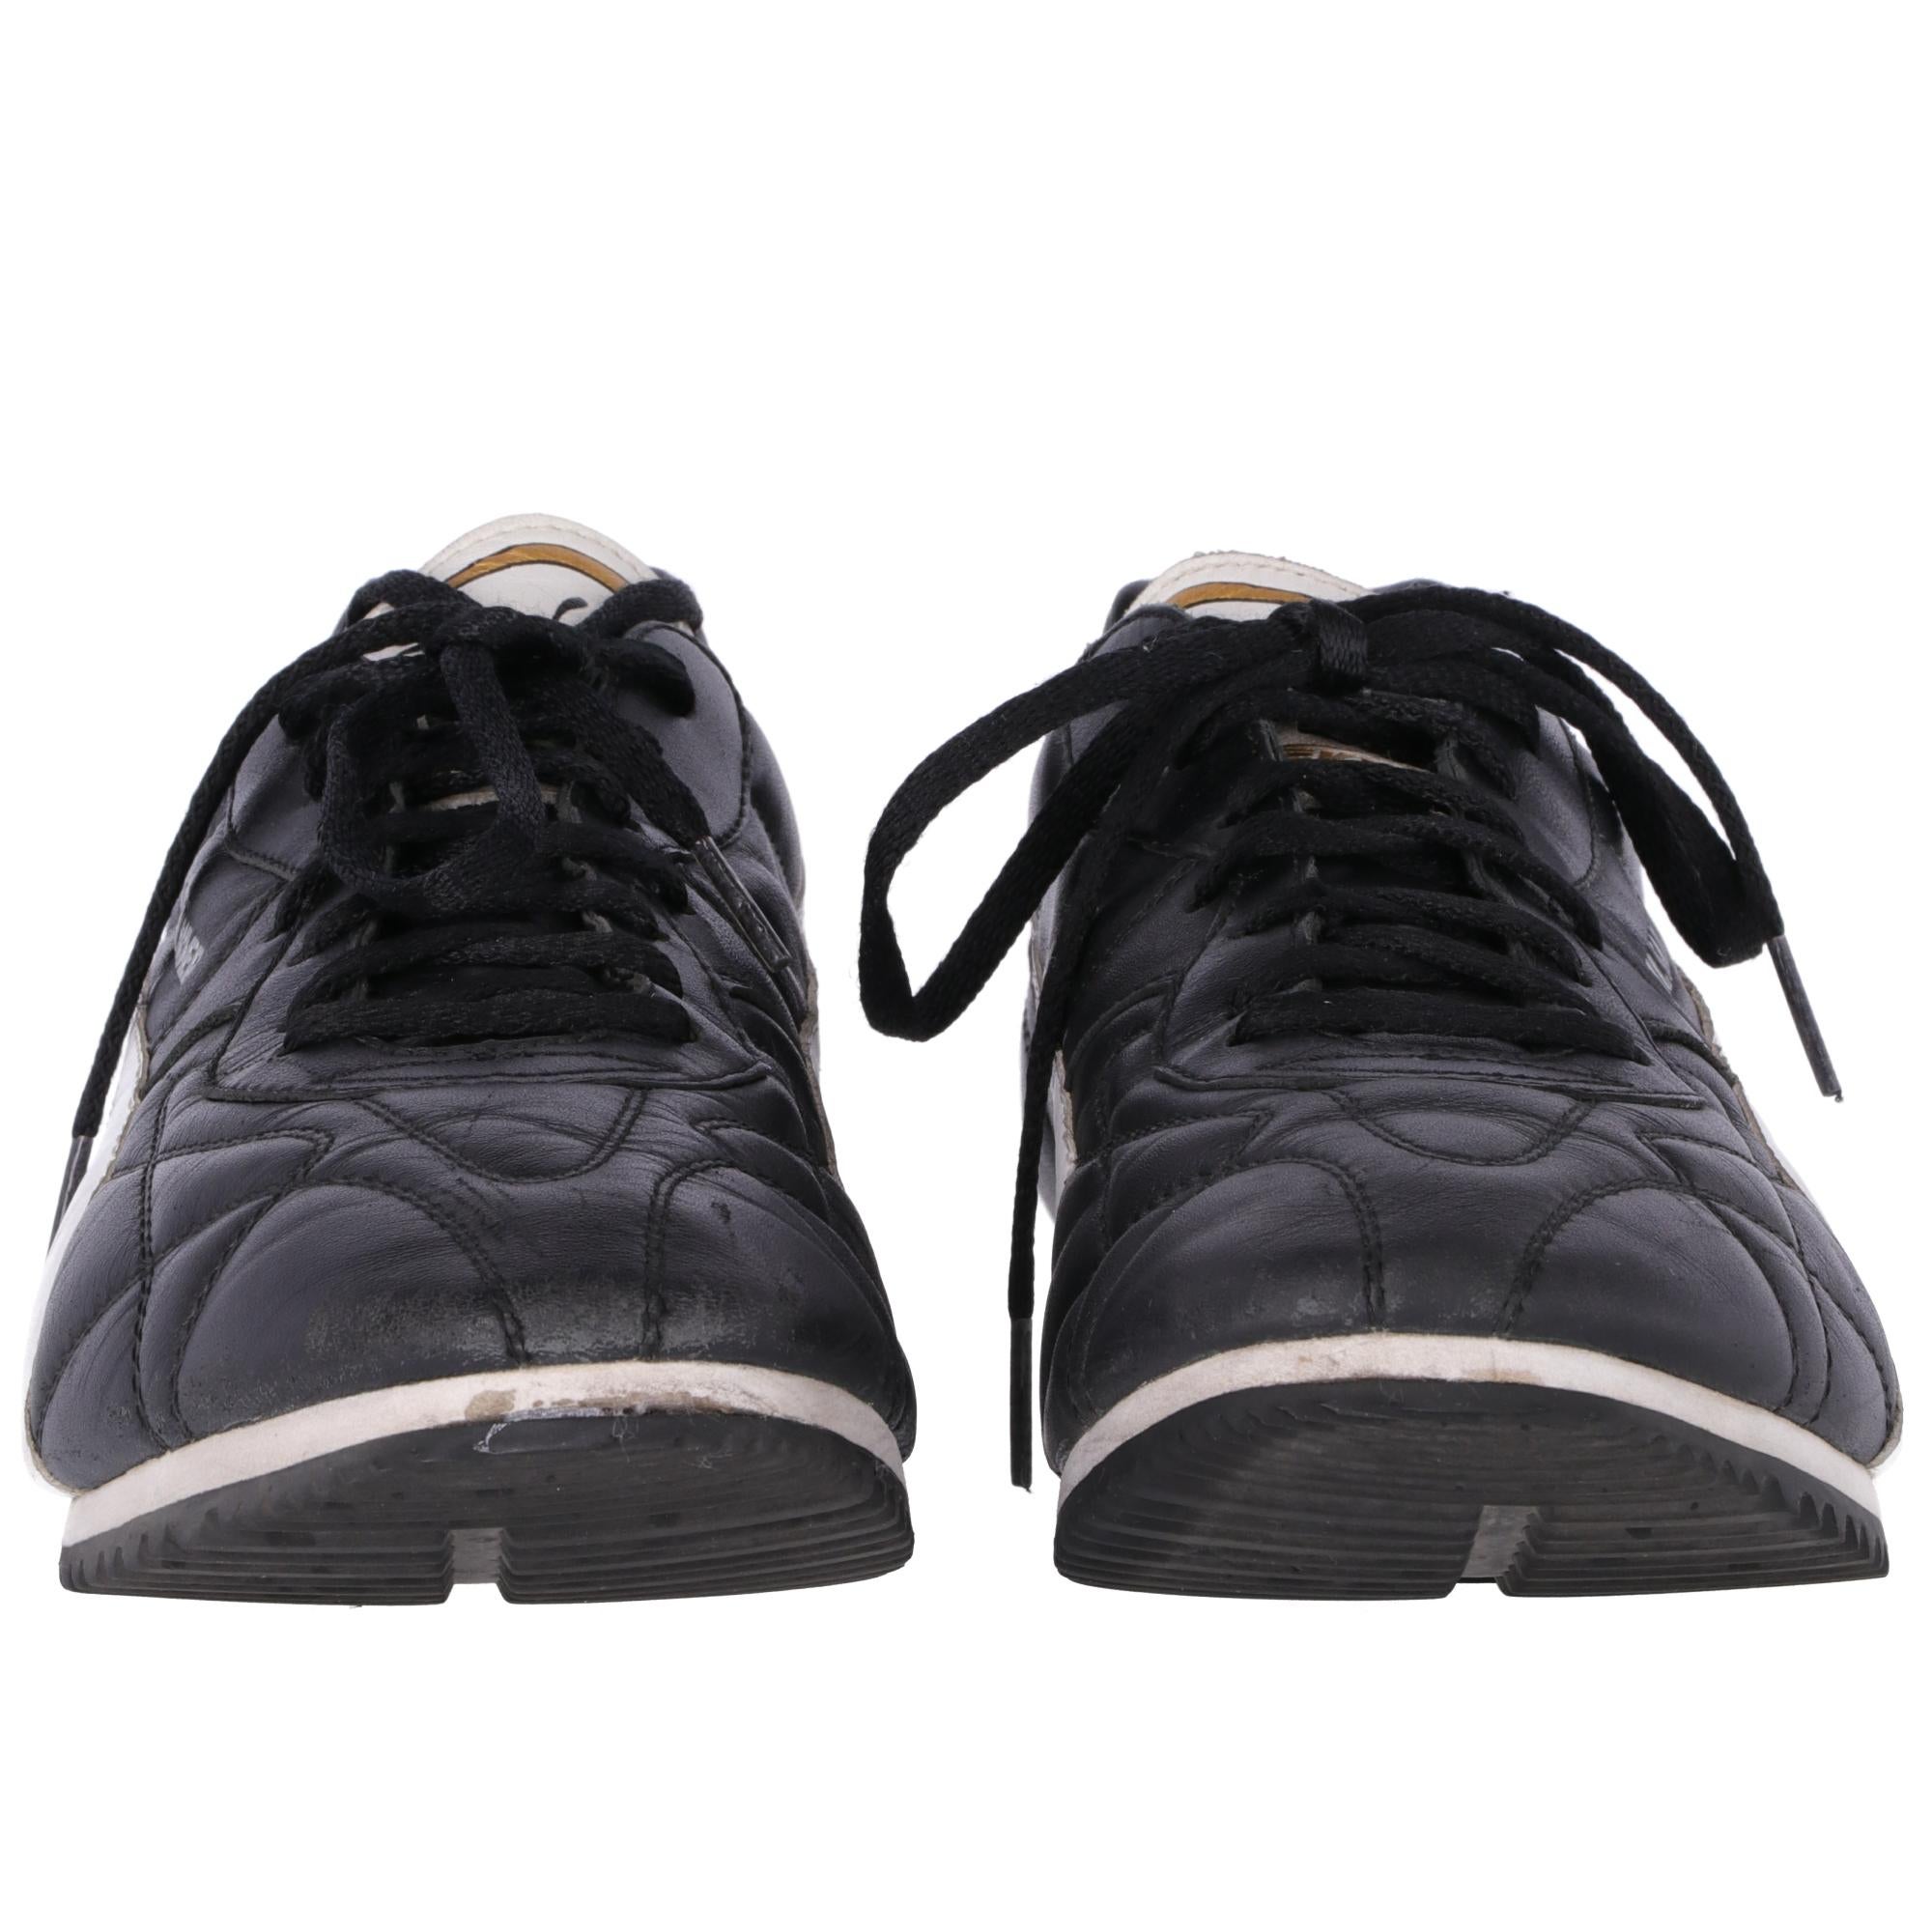 Jil Sander men's shoe for Puma in black leather with classic white Puma strip on the sides, decorative stitching on the whole shoe, black laces closure, round toe,  logoed tab and Jil Sander logo on the side. It comes with its original box.

The